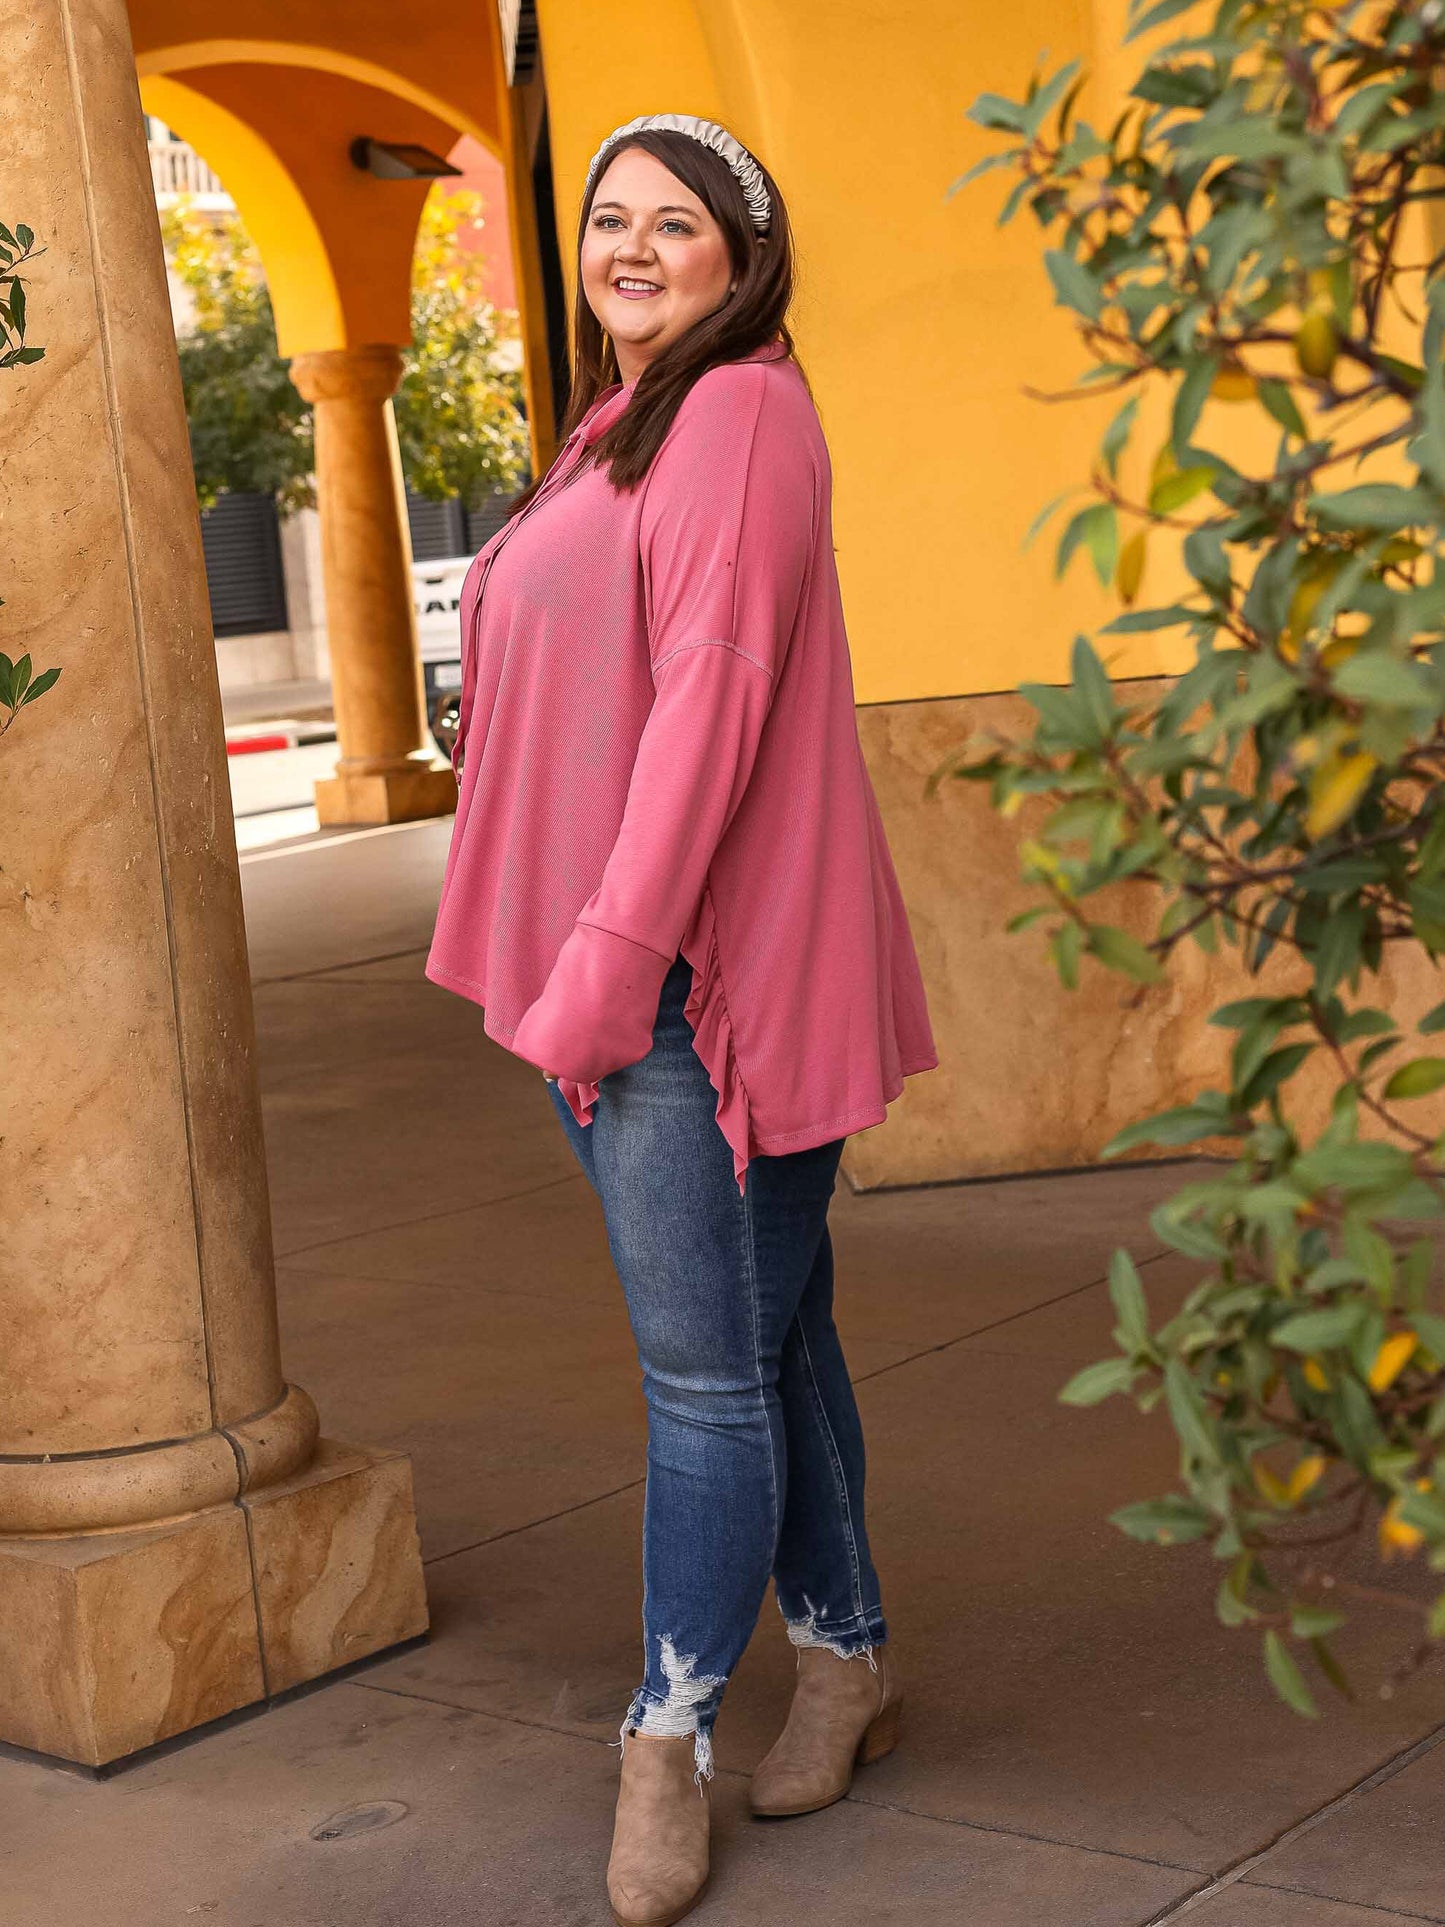 Pink ruffled top styled with jeans and booties